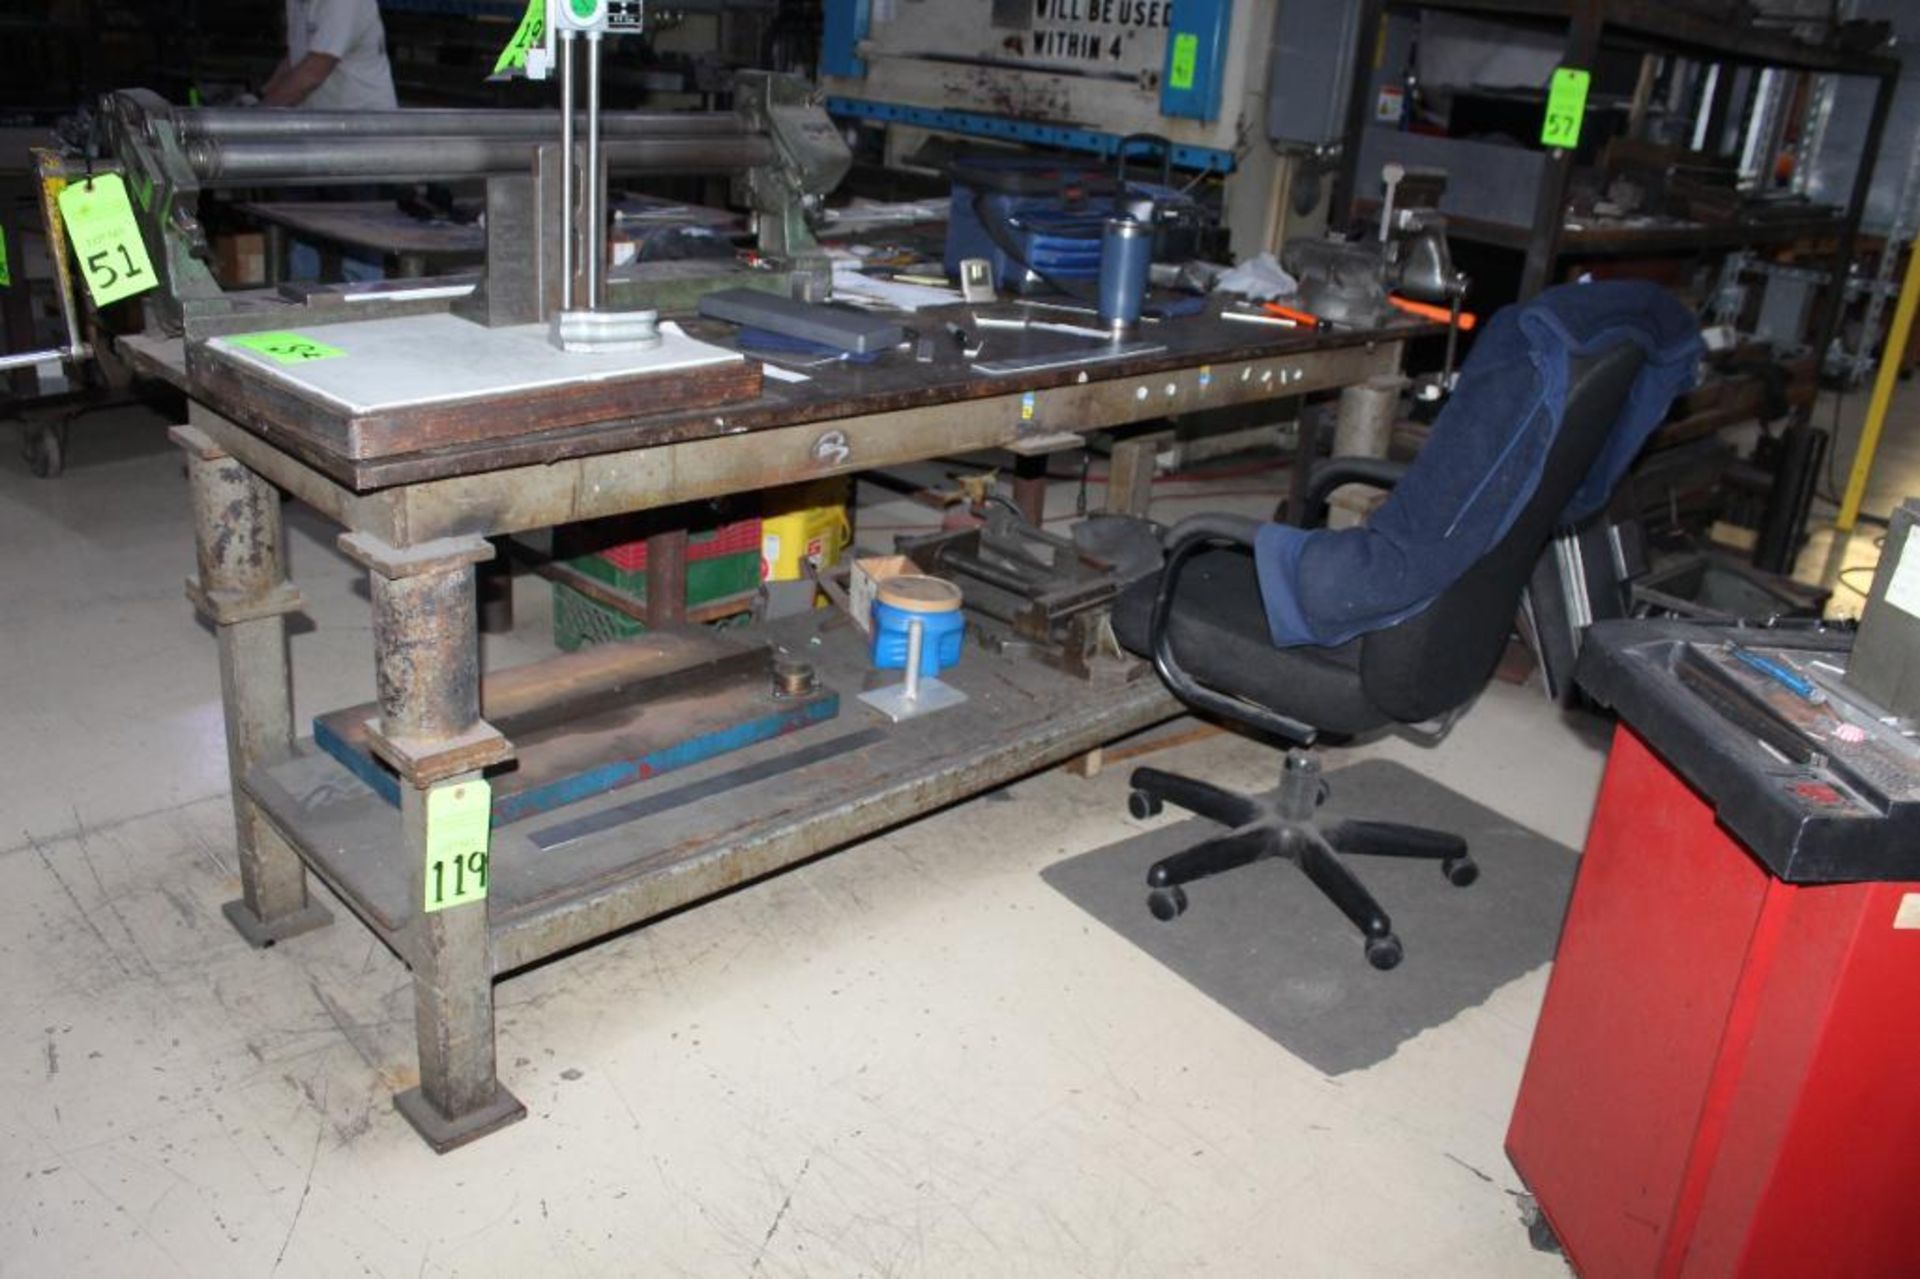 Work Bench with Vise 88"x29.5"x36"